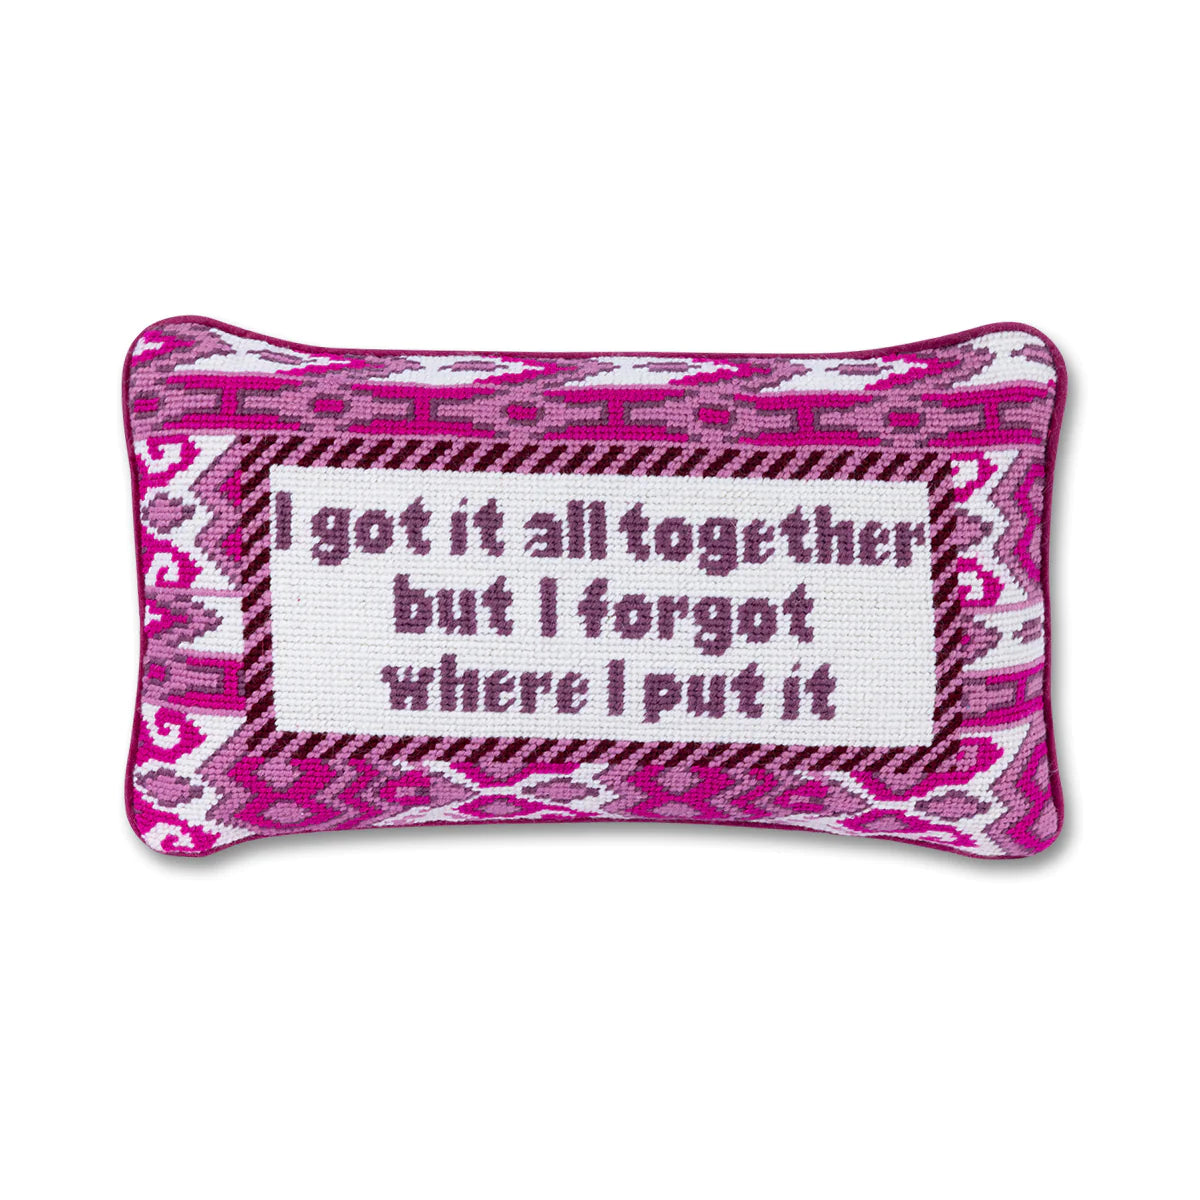 Got it all Together Pillow